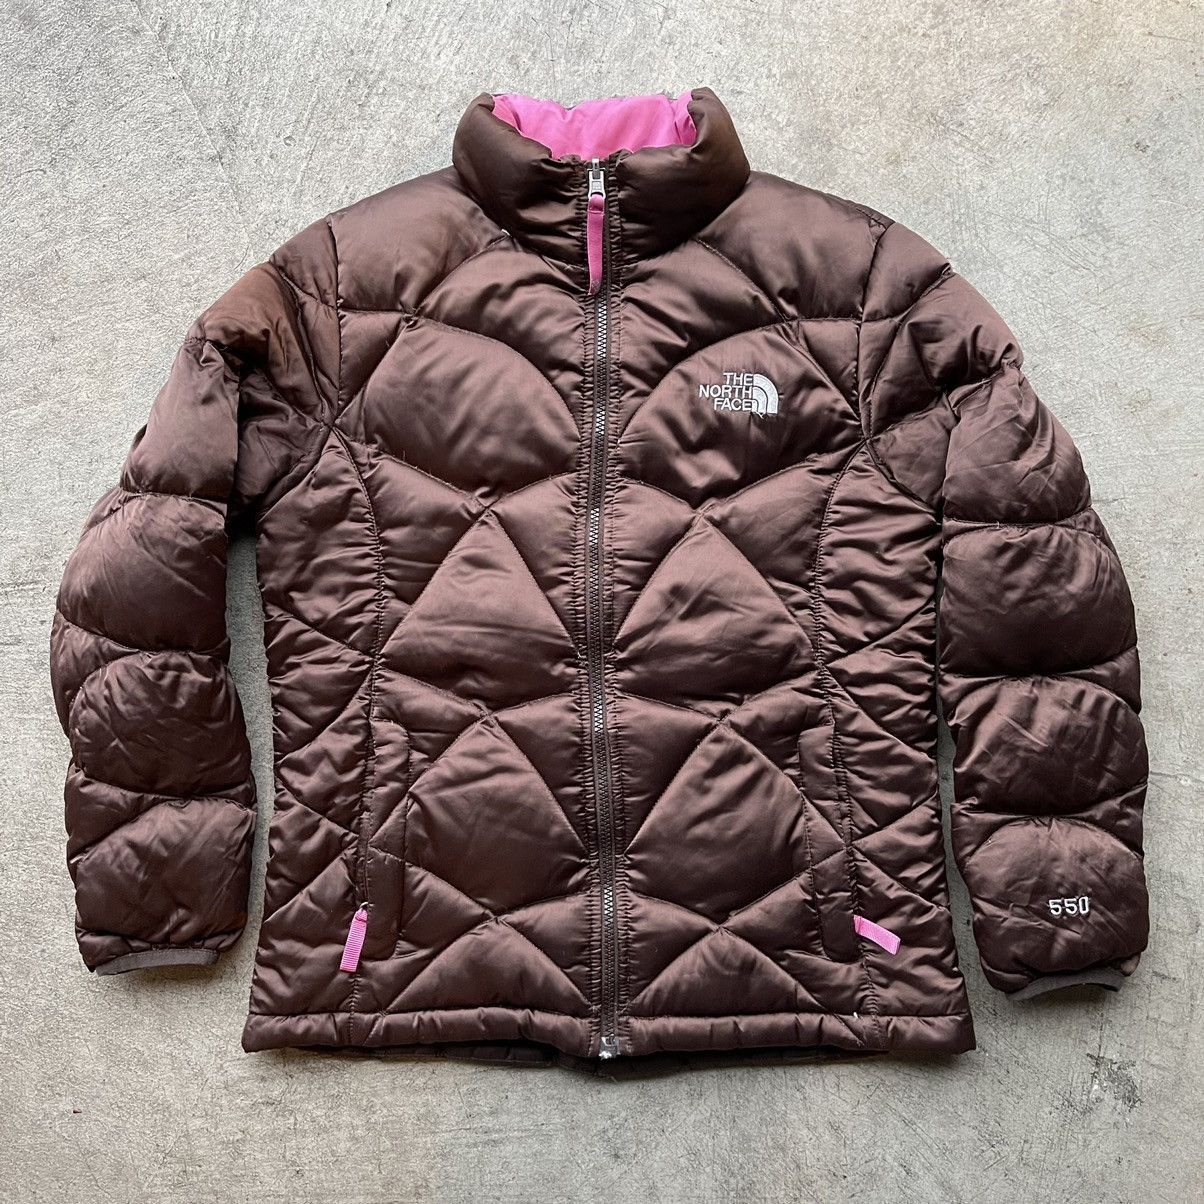 Vintage Brown North Face Puffer Jacket Nuptse 550 S Size US S / EU 44-46 / 1 - 1 Preview